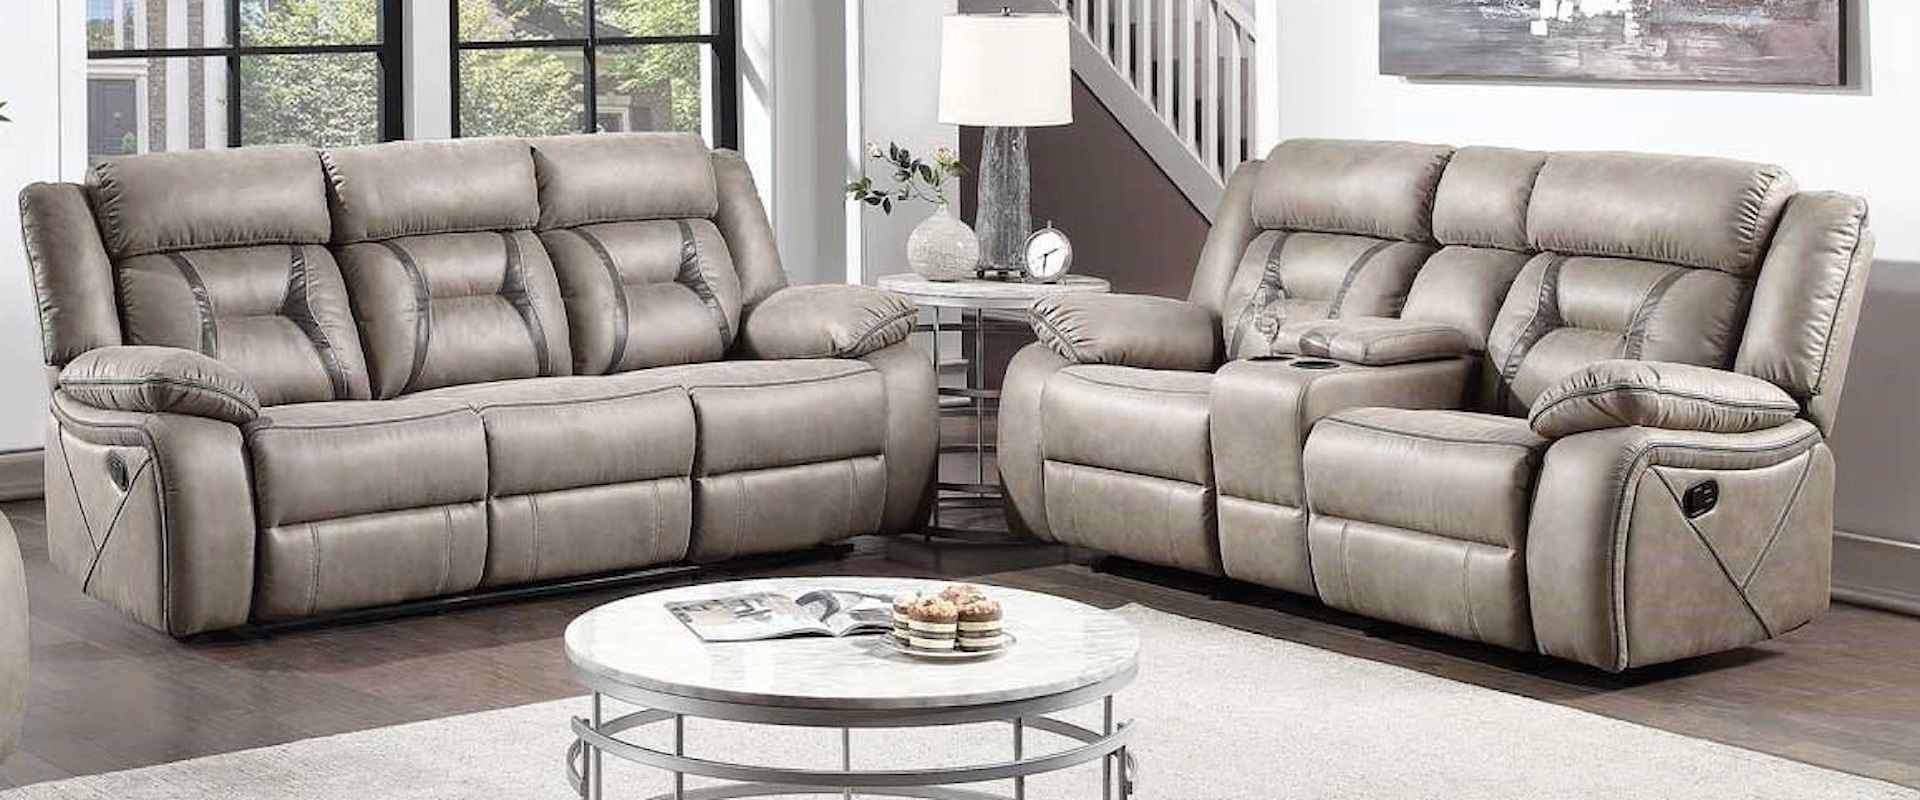 Manual Reclining Sofa with Drop Down Console and Reclining Glider Loveseat with Center Console Set